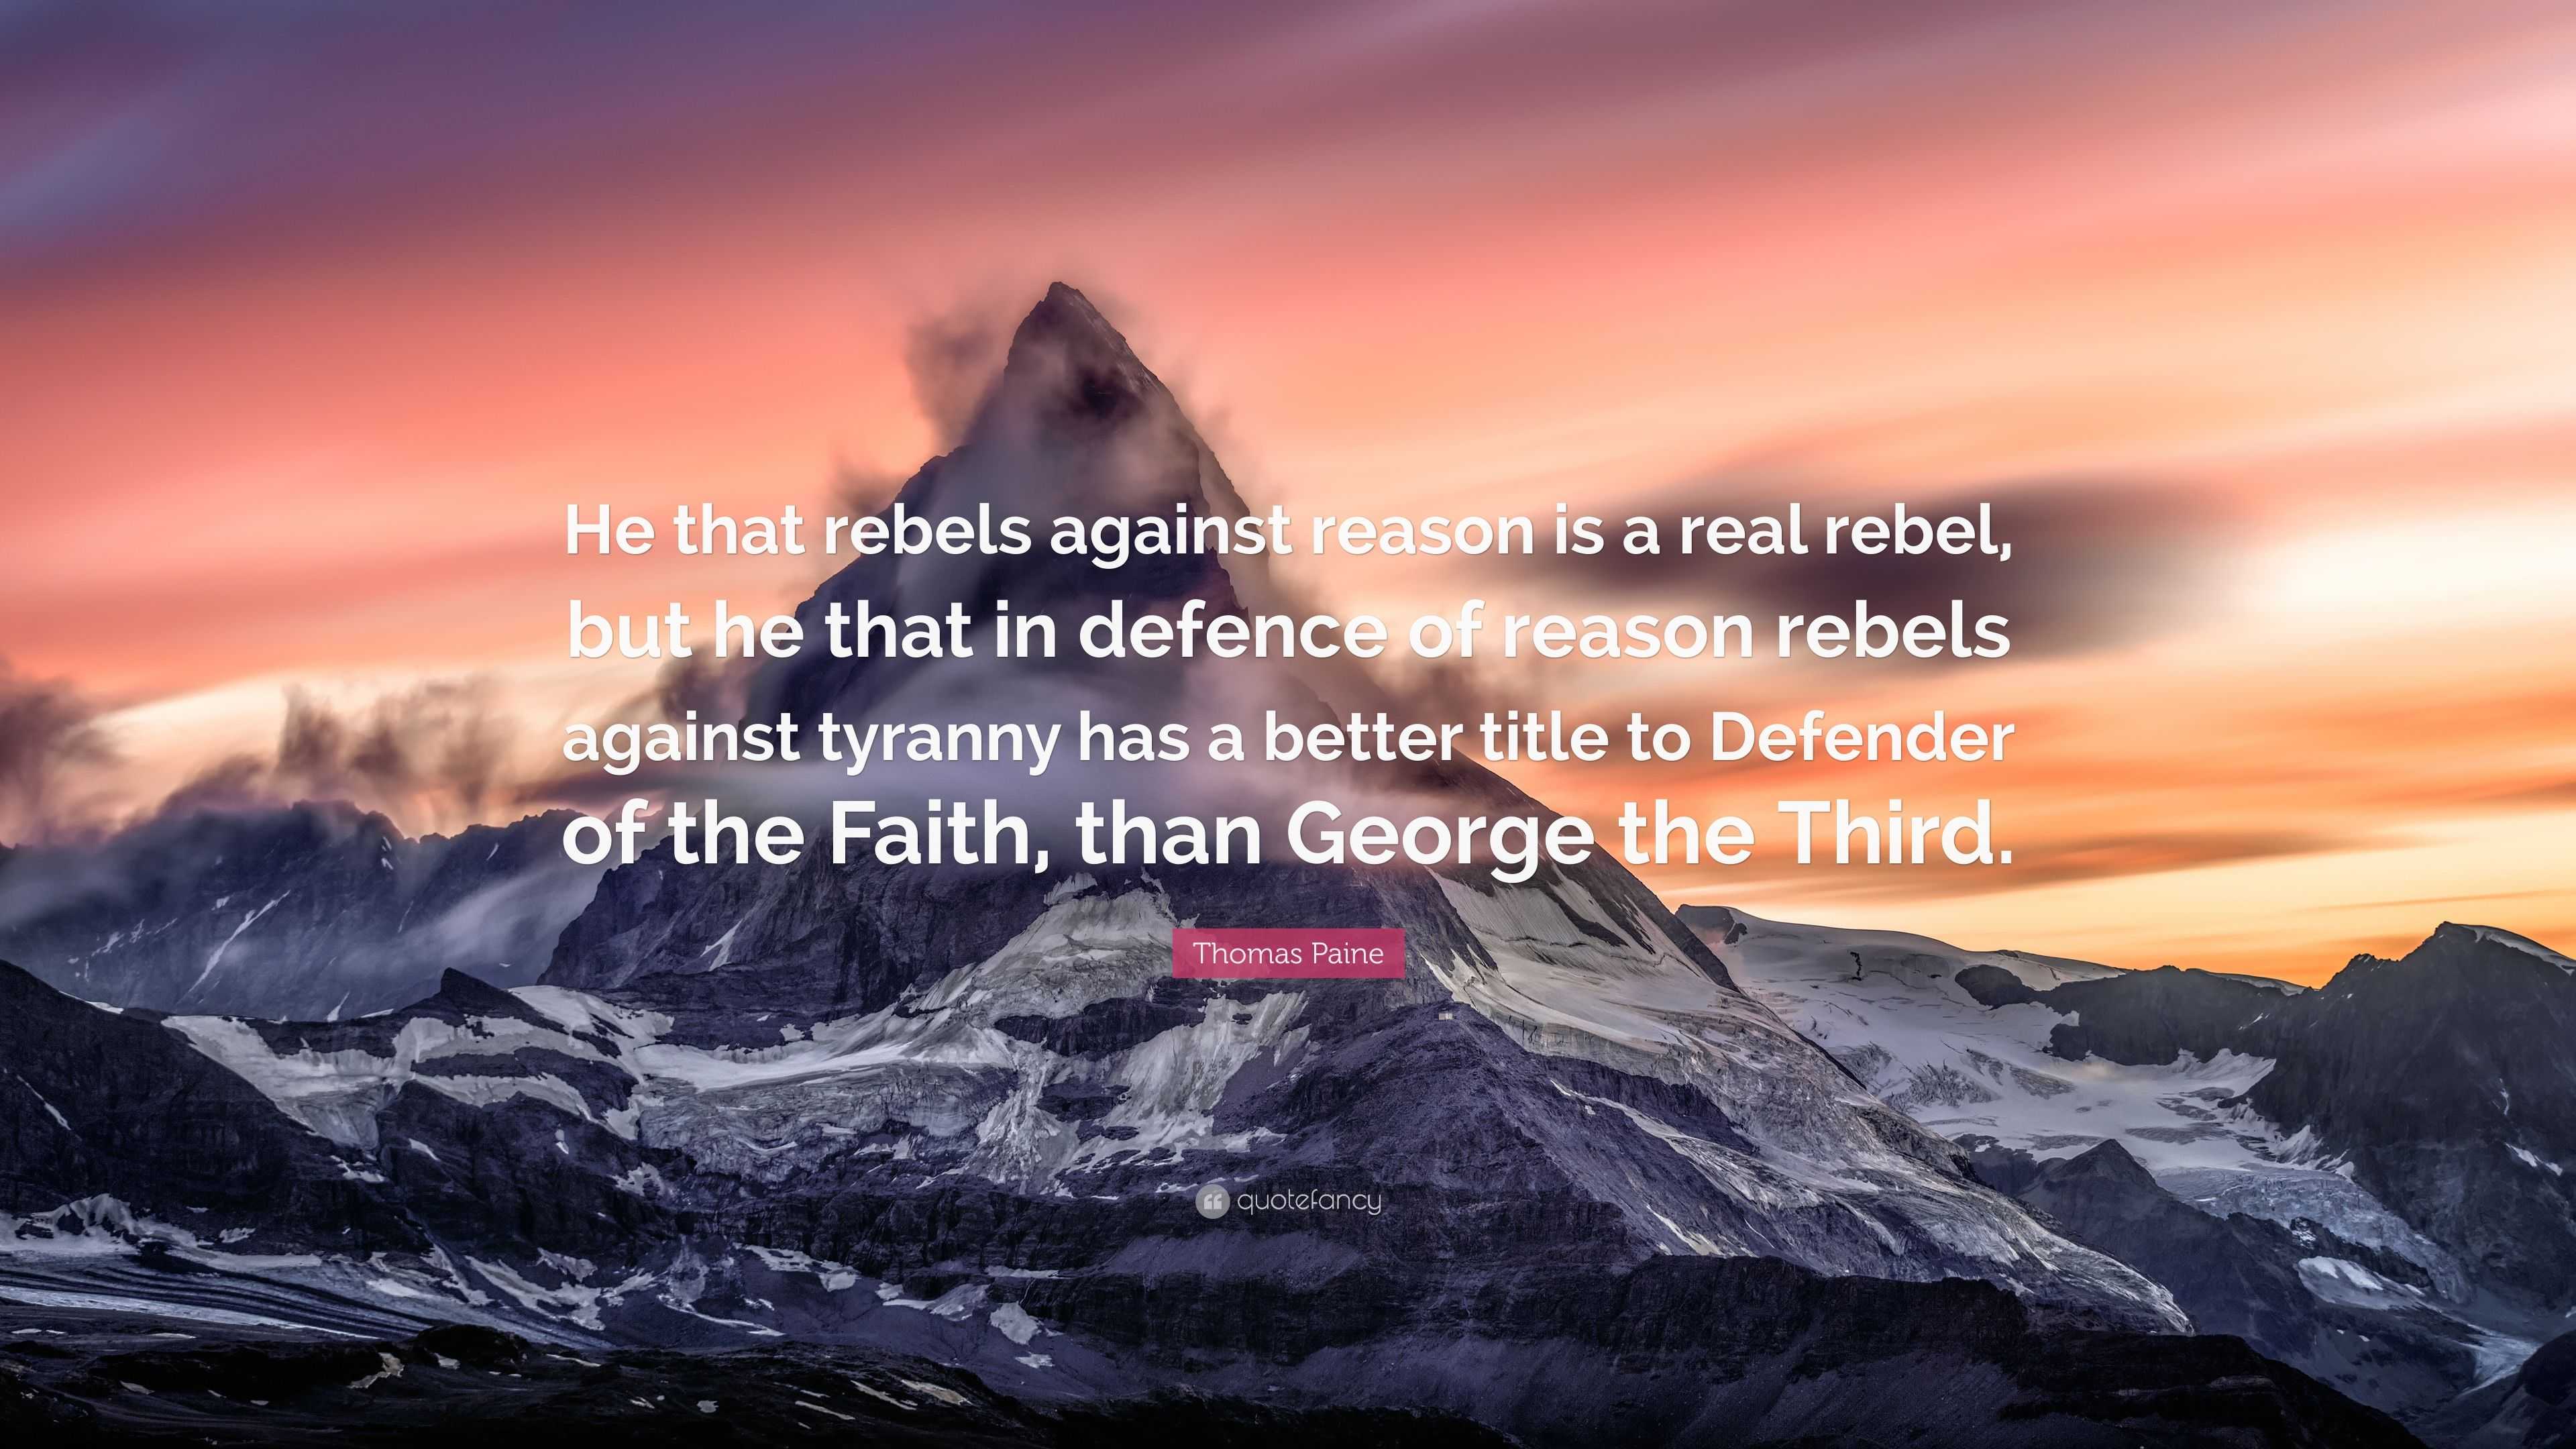 Thomas Paine Quote: “He that rebels against reason is a real rebel, but ...